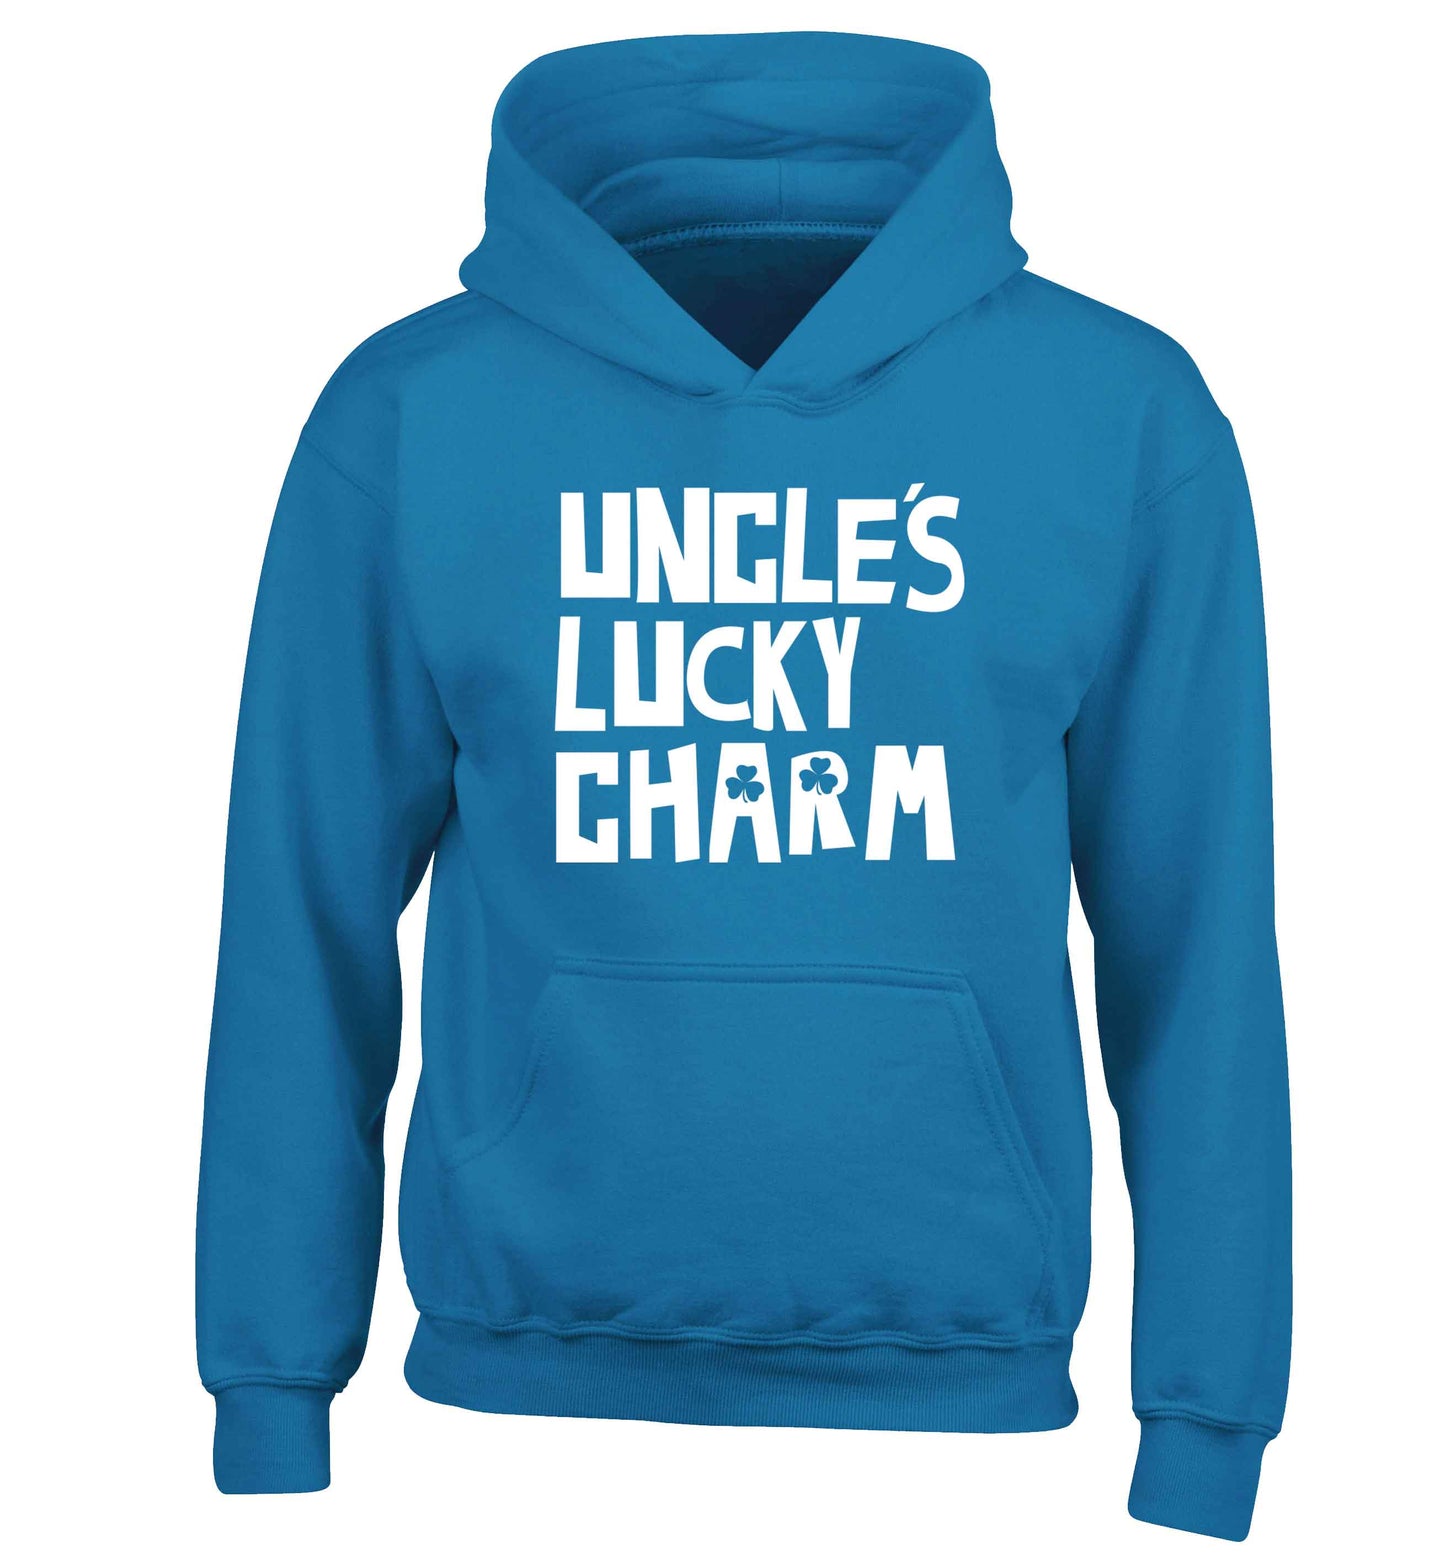 Uncles lucky charm children's blue hoodie 12-13 Years